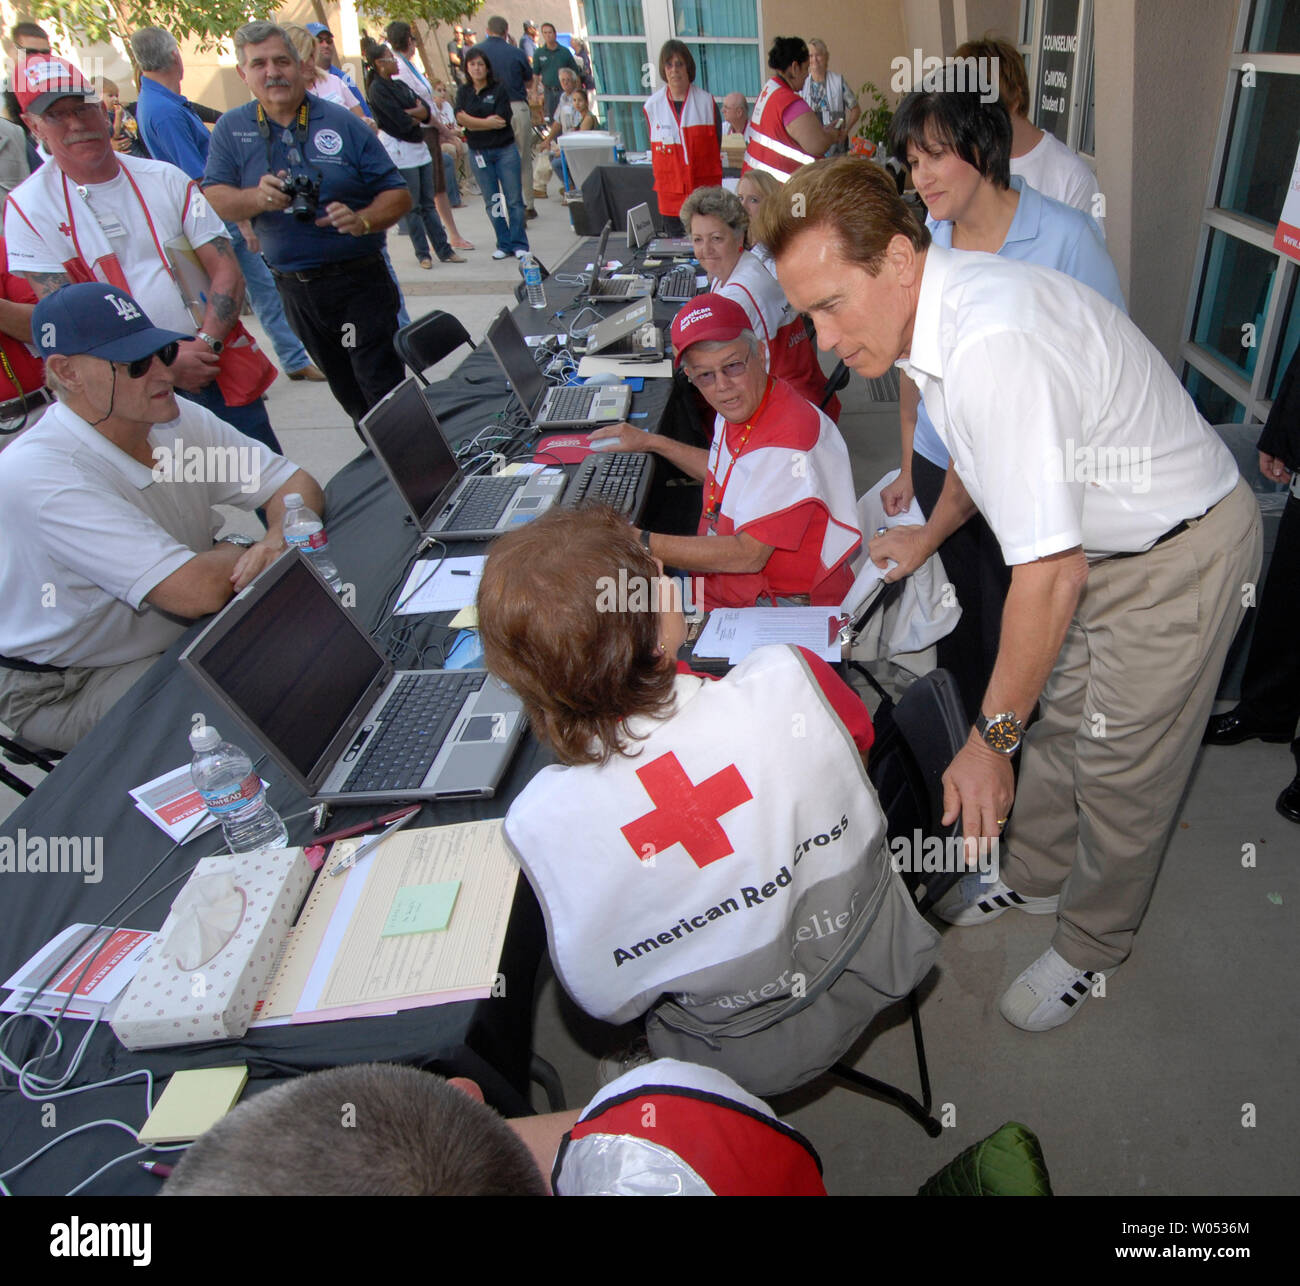 California Governor Arnold Schwarzenegger speaks with  Red Cross workers at an Assistance Center set up in Rancho San Diego, California to help victims of the wildfires, on October 28, 2007. The Harris Fire killed 5 people, forced thousands to evacuate and destroyed hundreds of homes.  (UPI Photo/Earl Cryer) Stock Photo